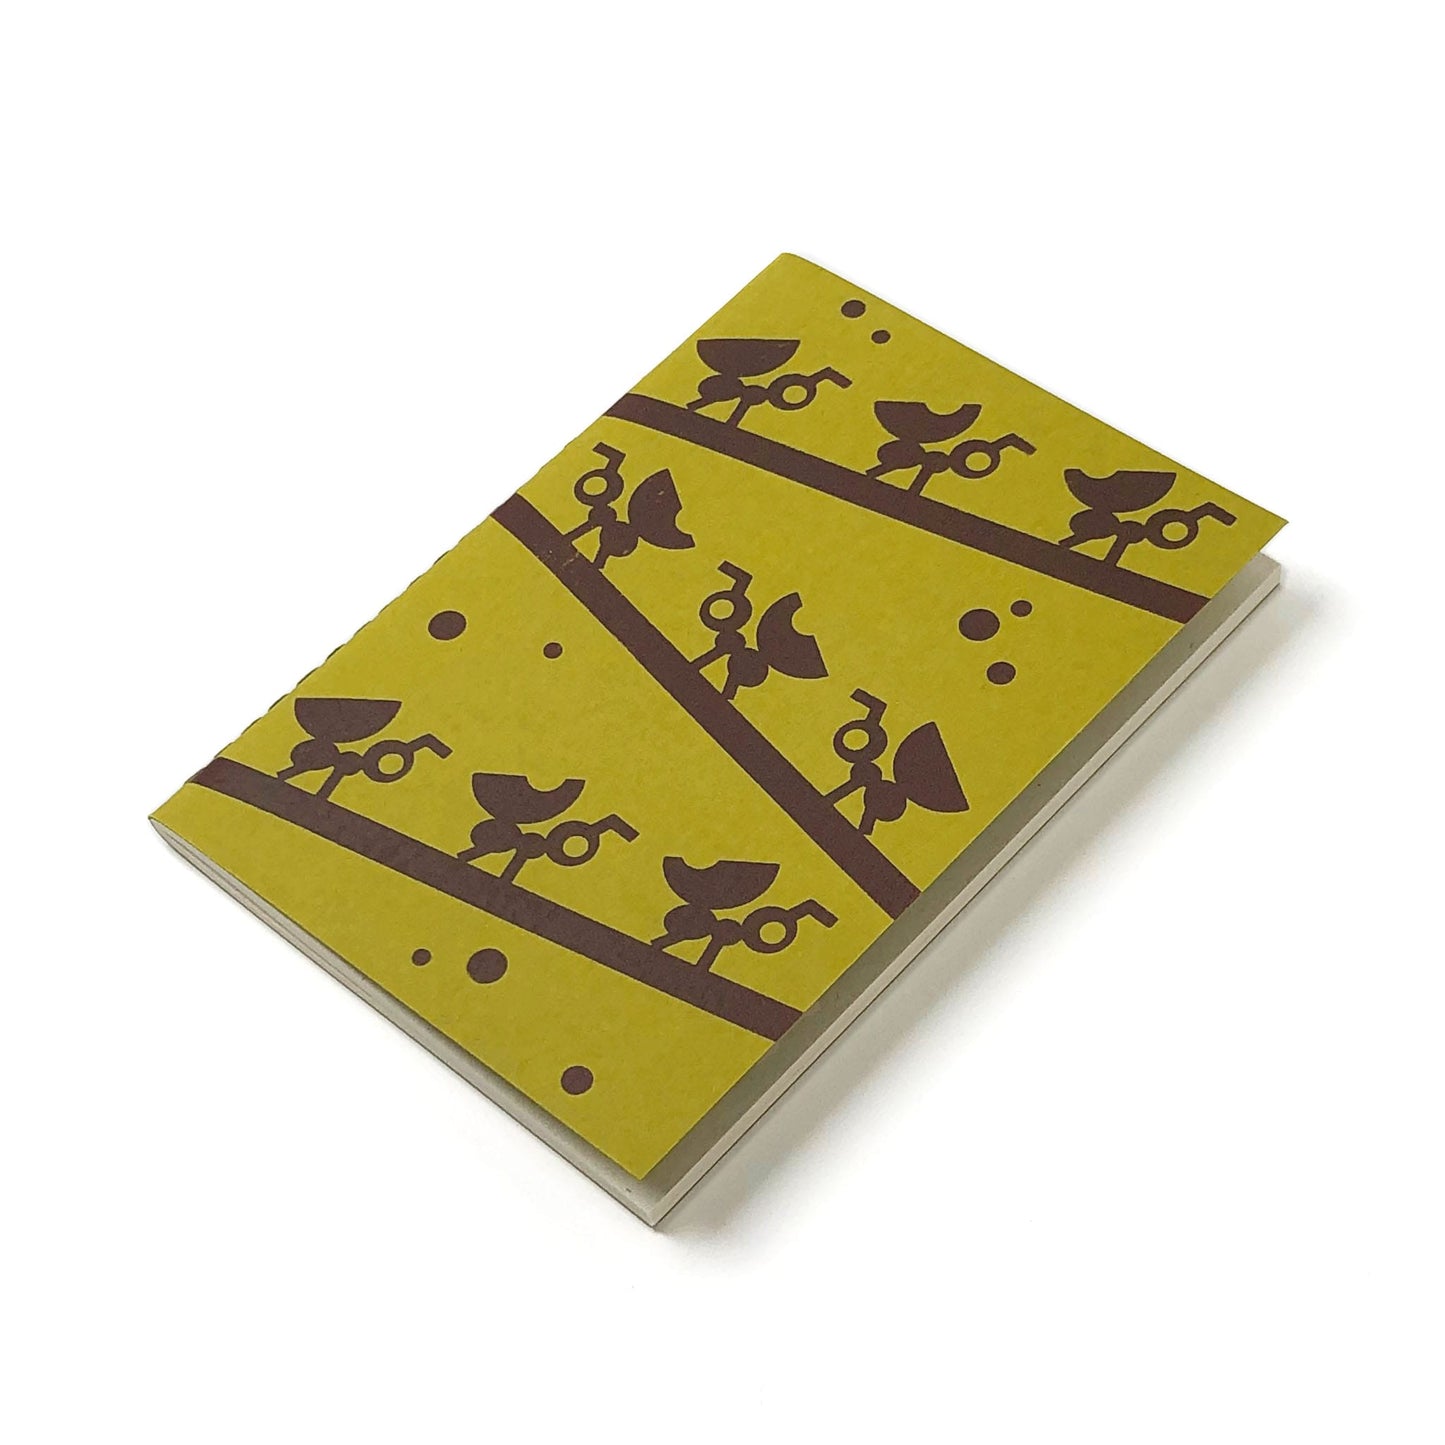 Tilted green notebook with design of dark brown silhouettes of branches with rows of ants carrying leaves with white pages, all on a white background.